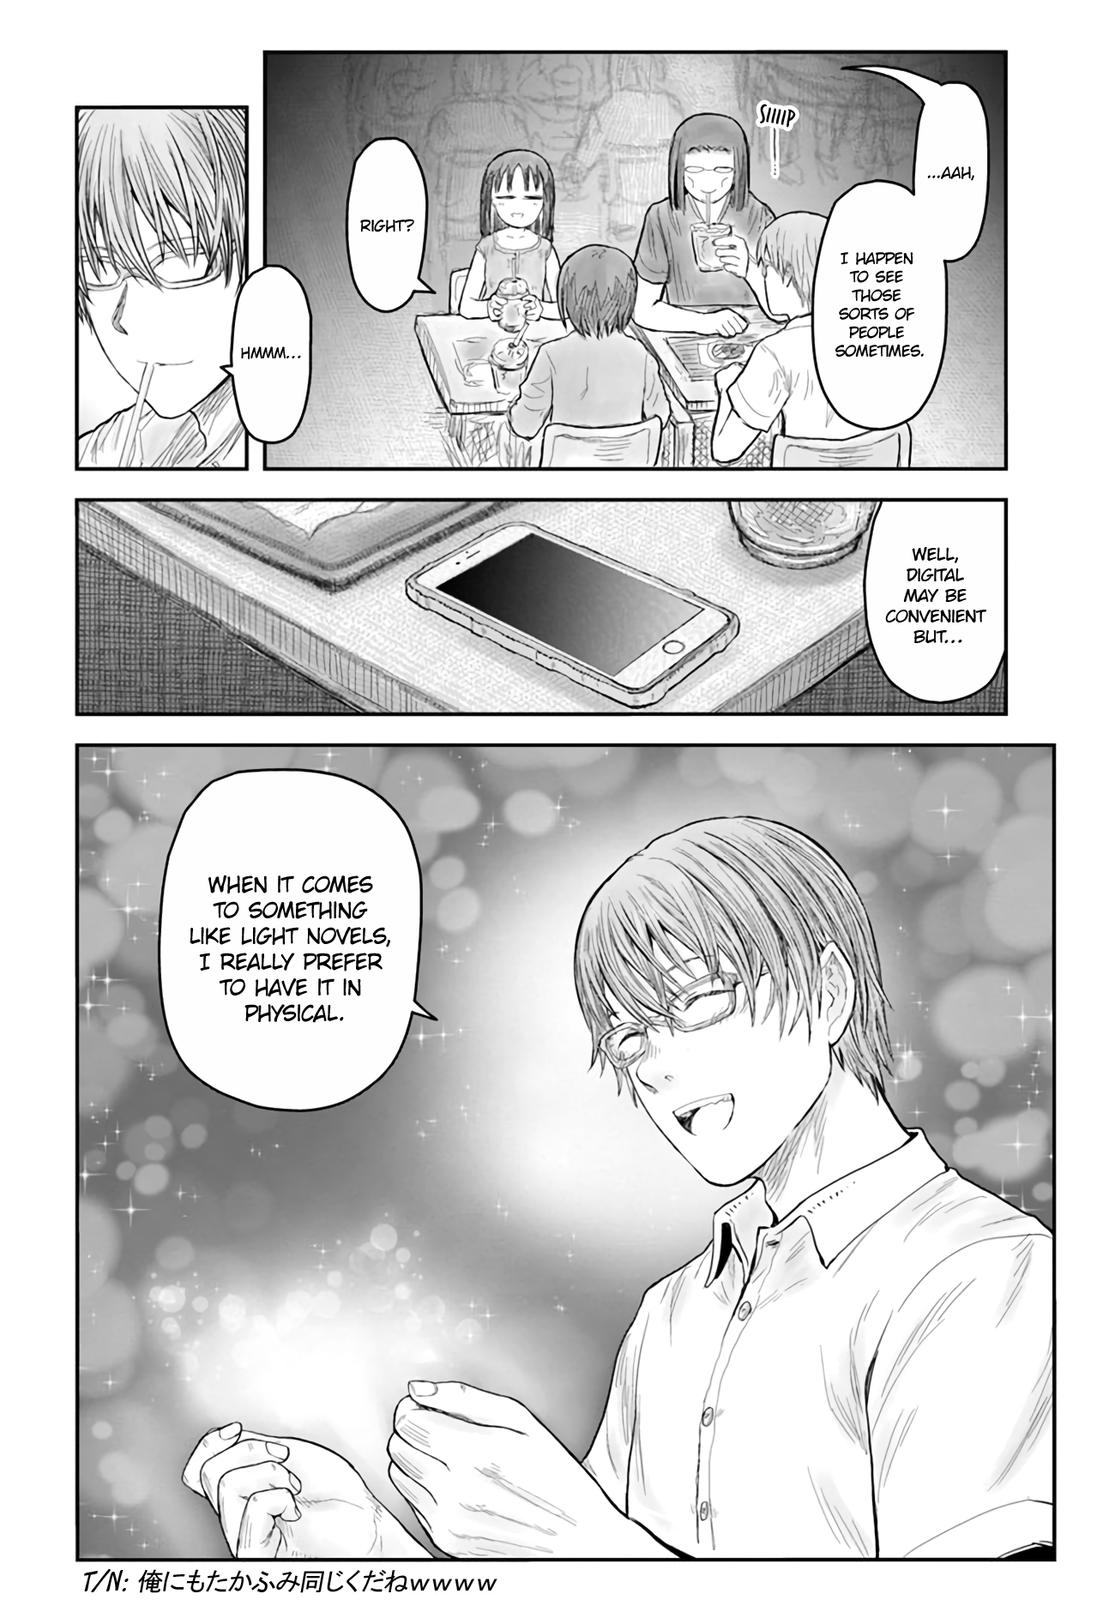 Uncle from Another World, Chapter 41 - Uncle from Another World Manga Online